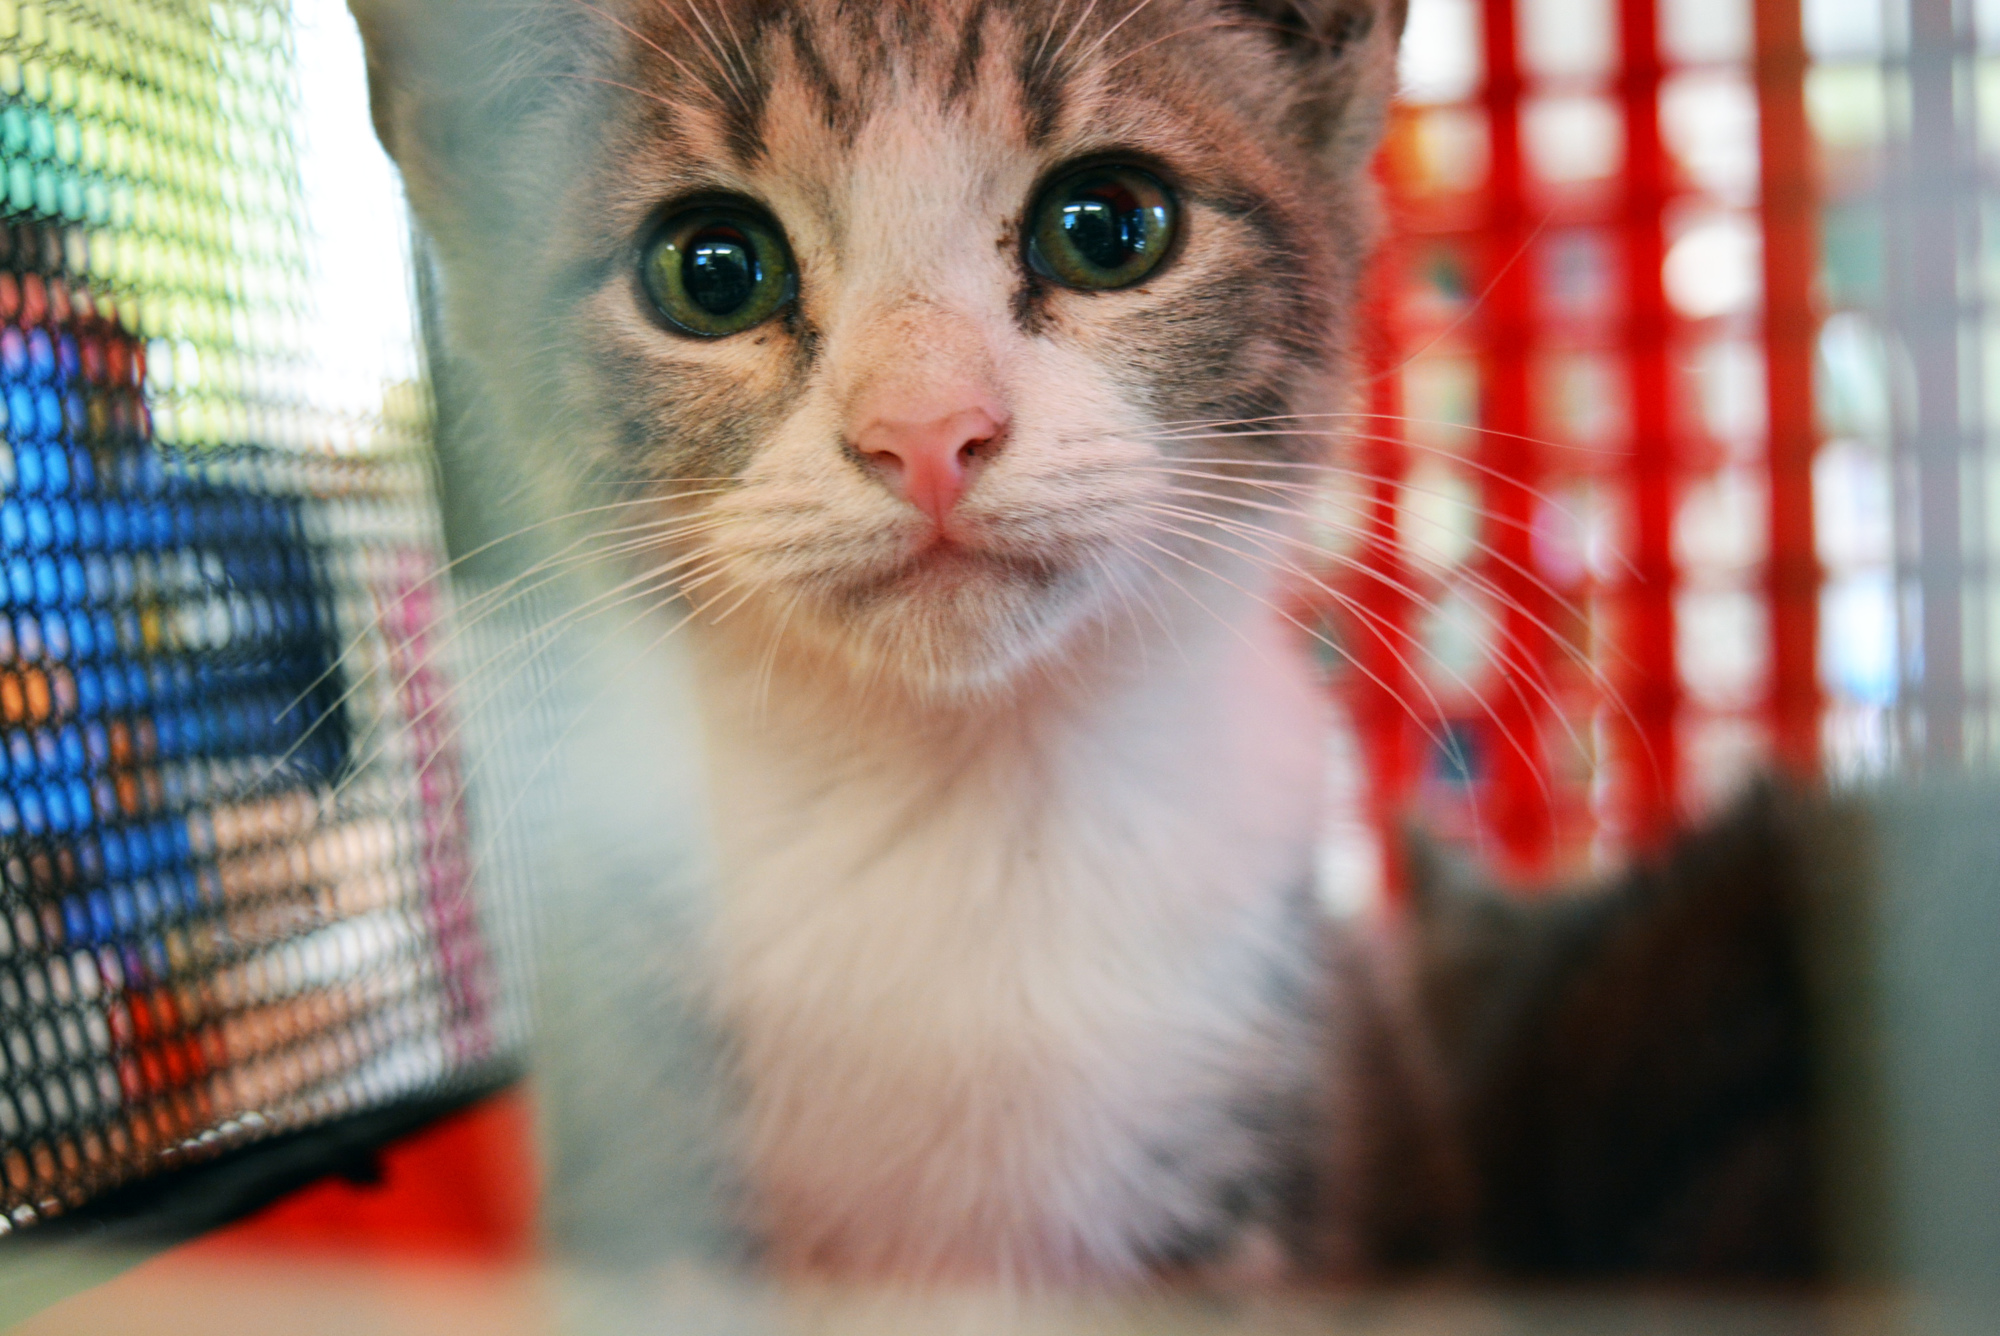 This kitten was in foster care and now is ready for adoption.